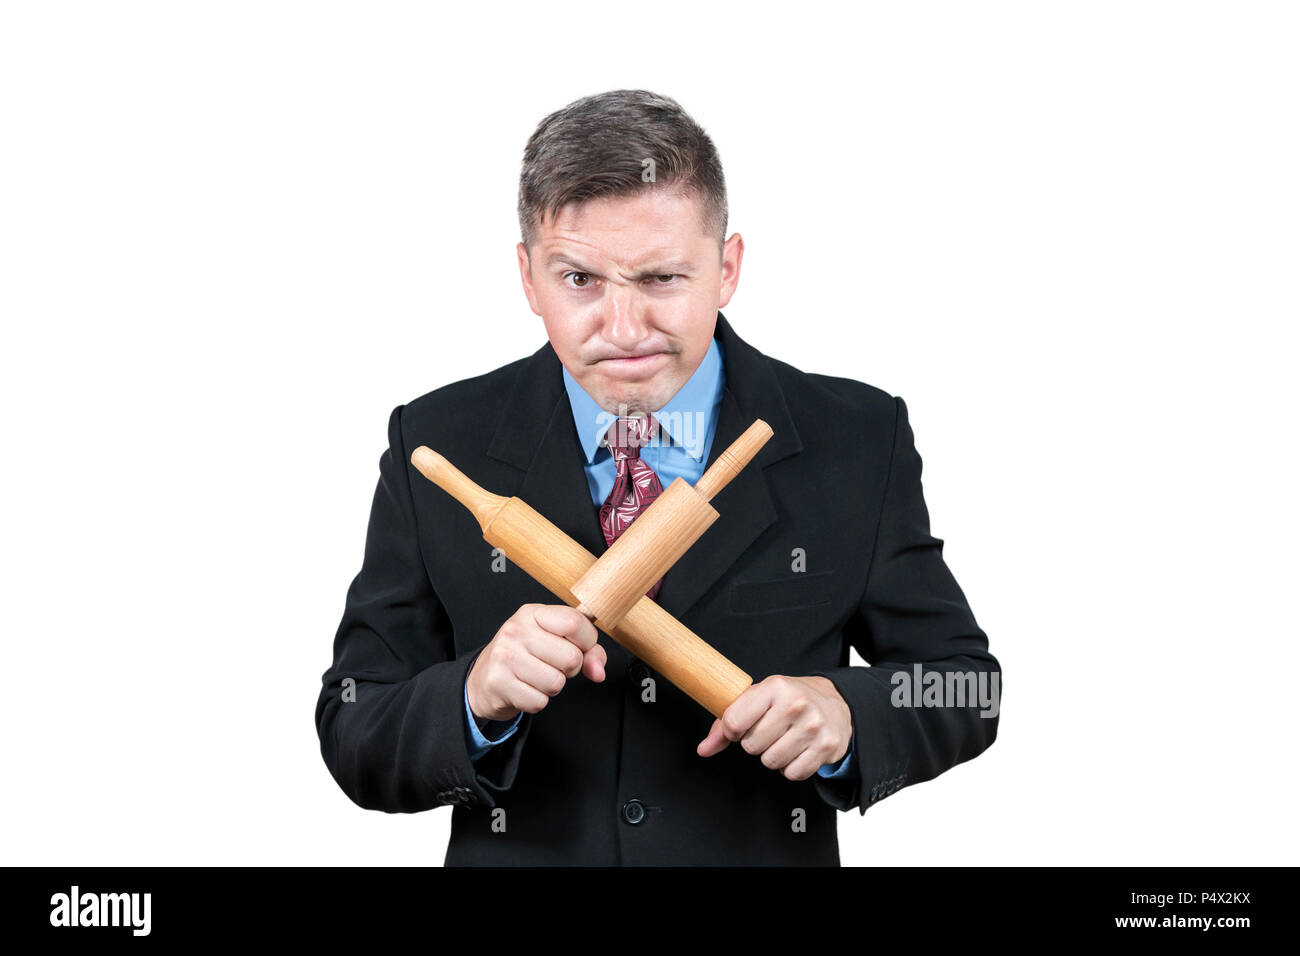 dissatisfied-businessman-with-two-crossed-rolling-pins-isolated-on-white-background-P4X2KX.jpg